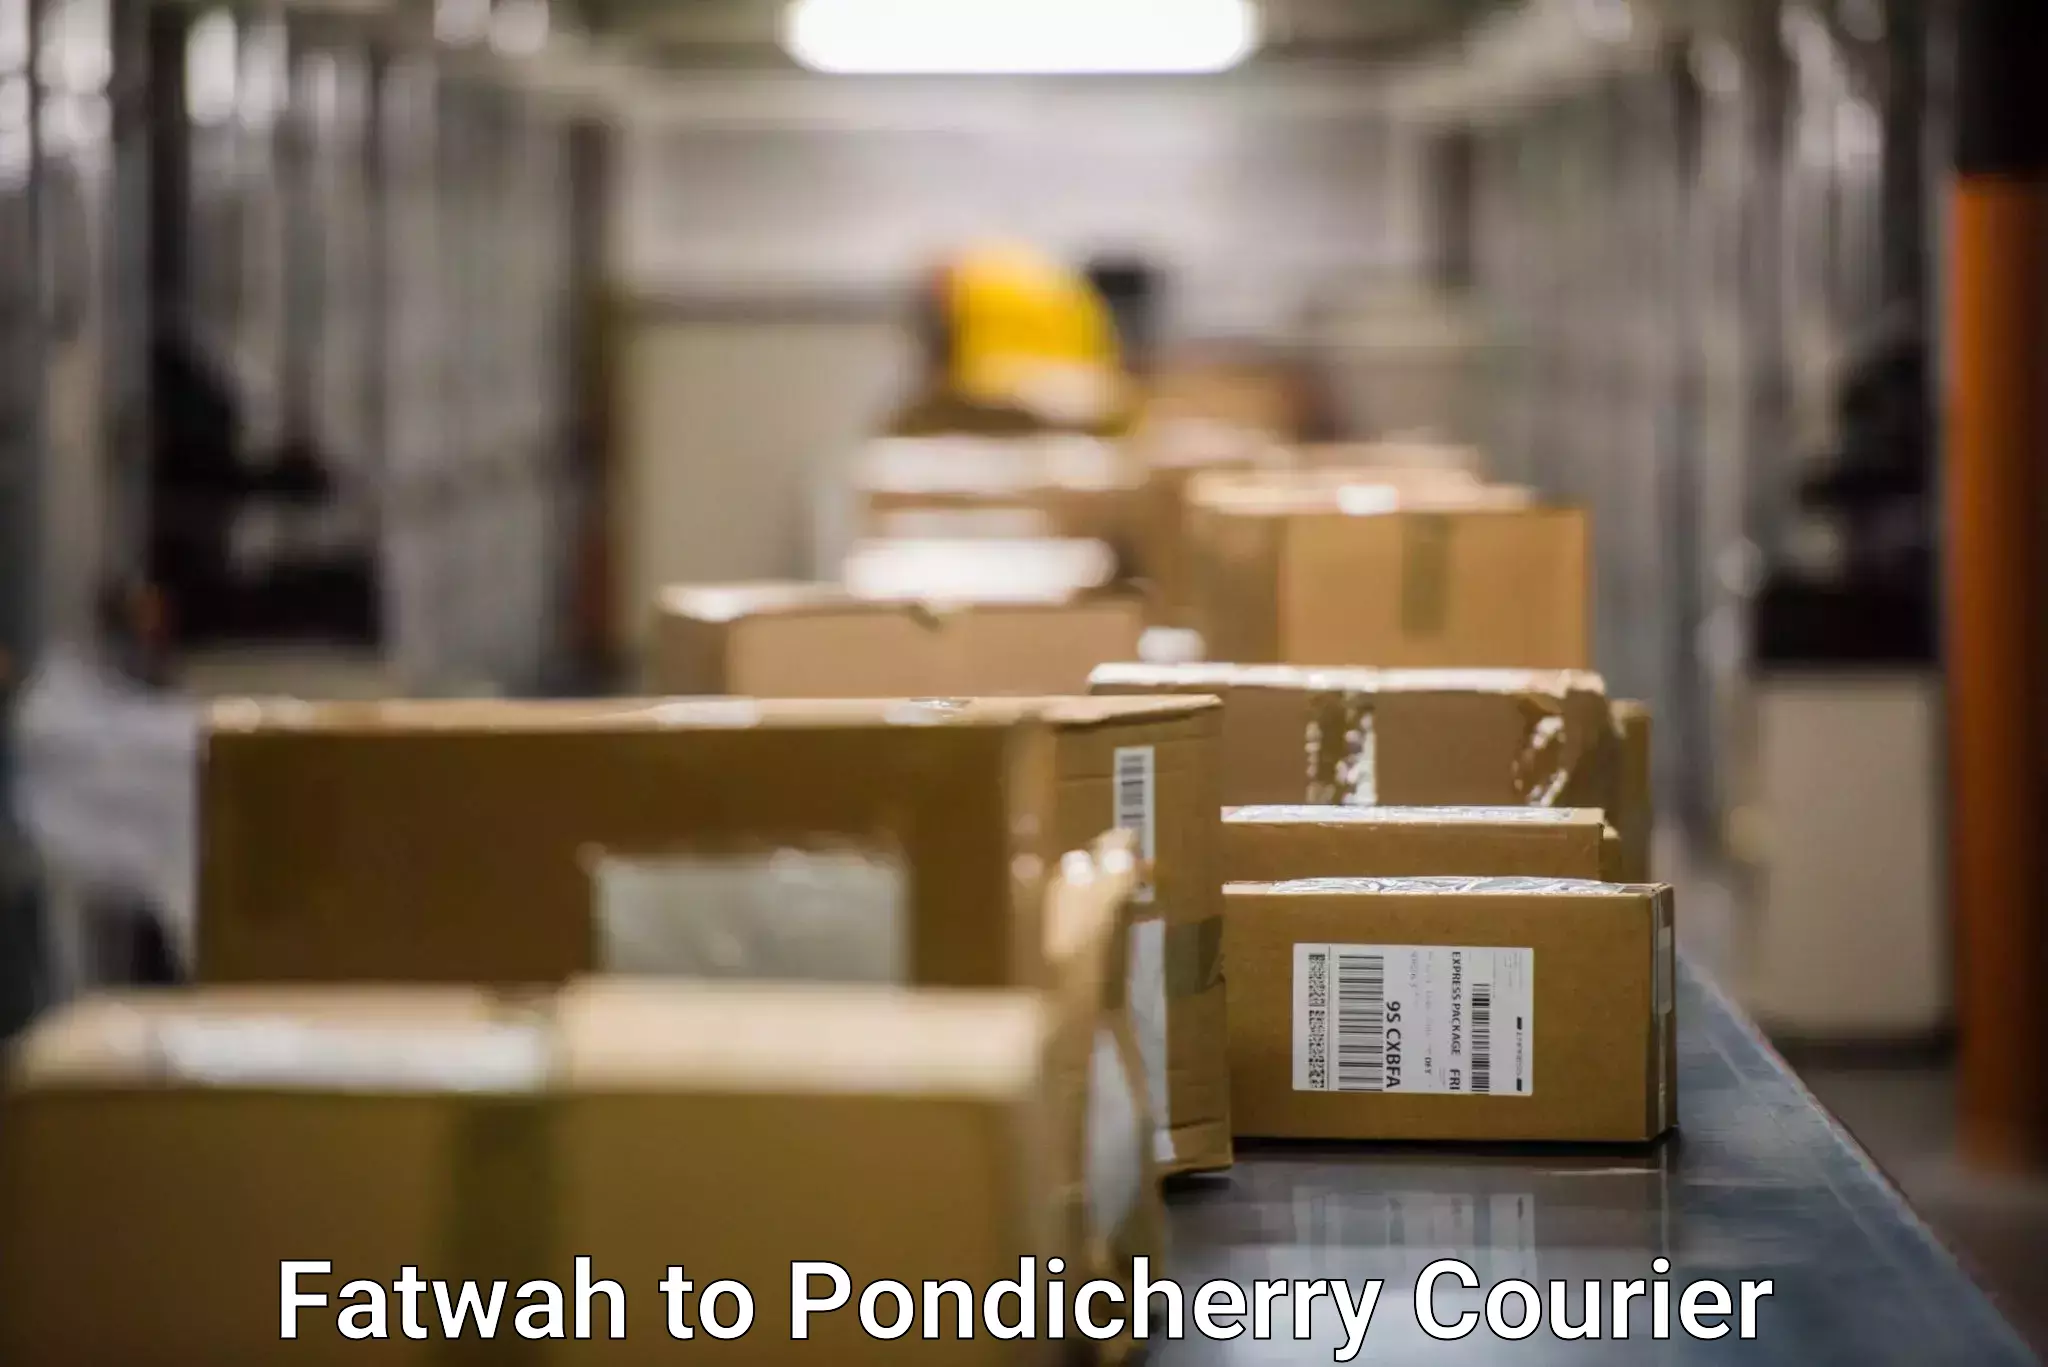 Enhanced shipping experience Fatwah to Pondicherry